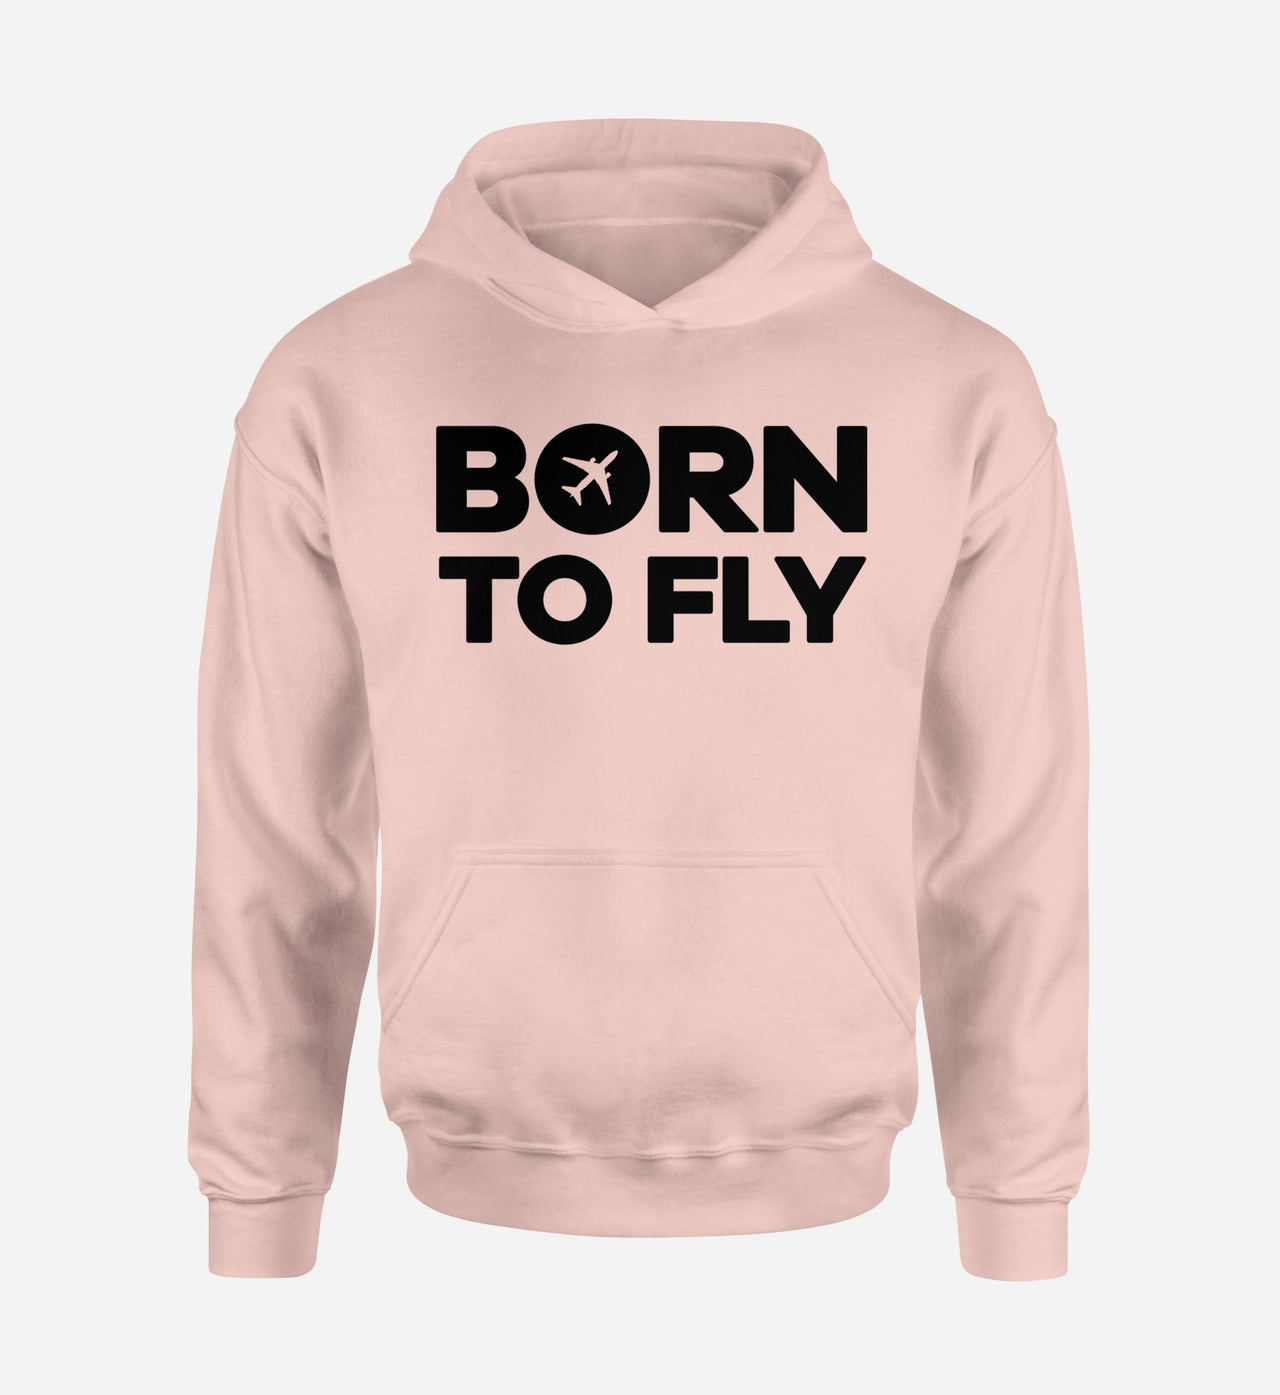 Born To Fly Special Designed Hoodies